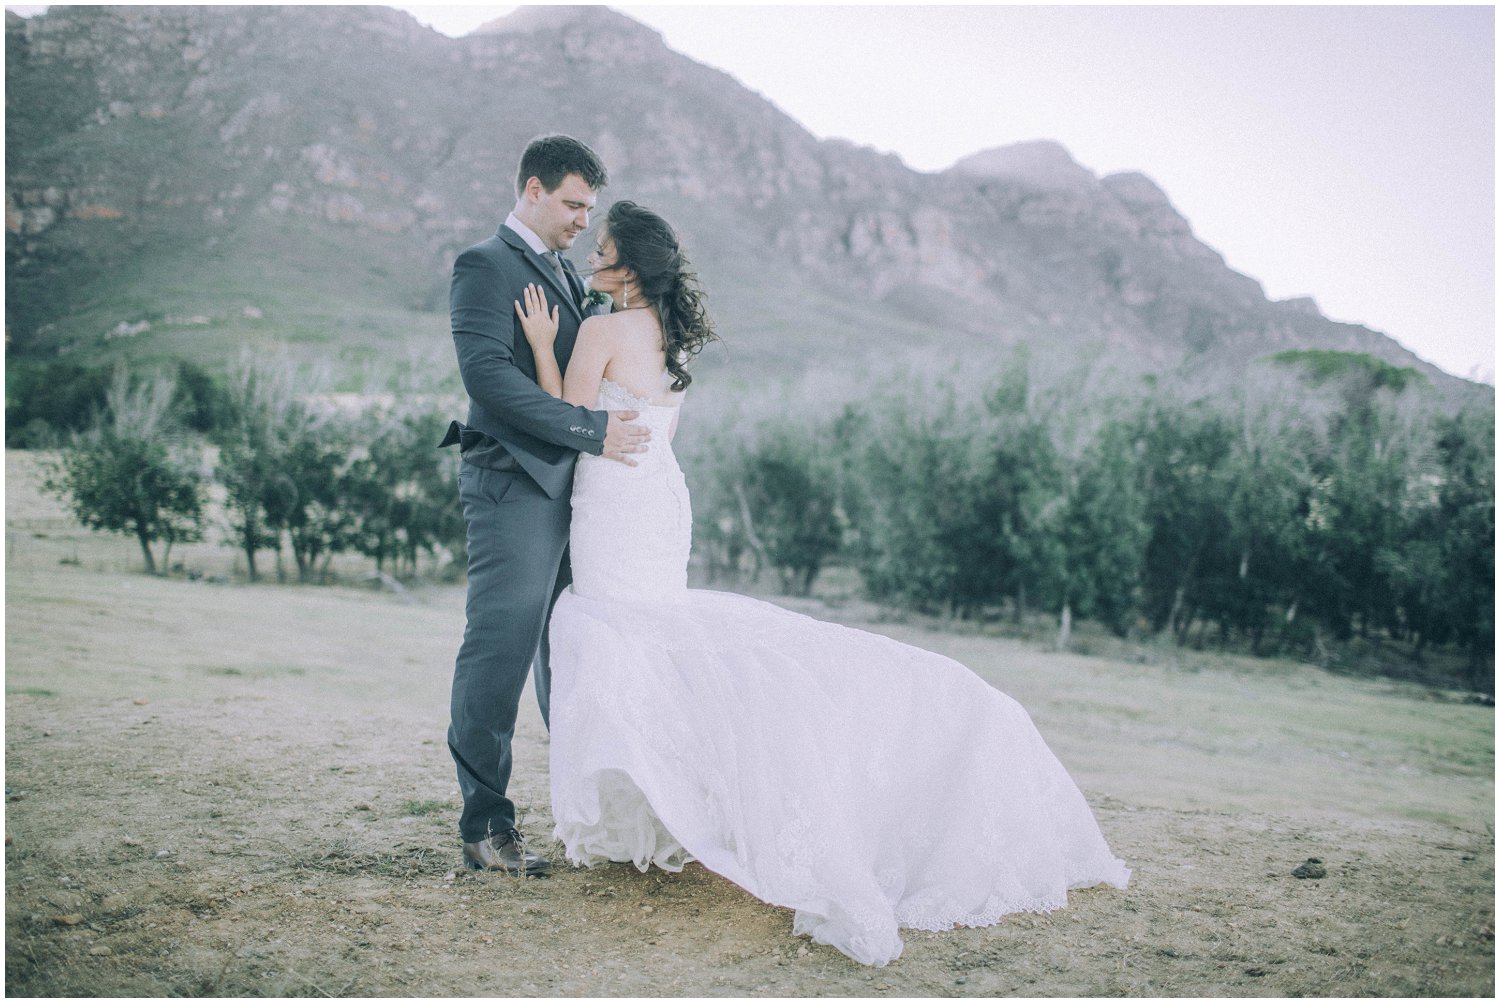 Top Artistic Creative Documentary Wedding Photographer Cape Town South Africa Rue Kruger_0367.jpg